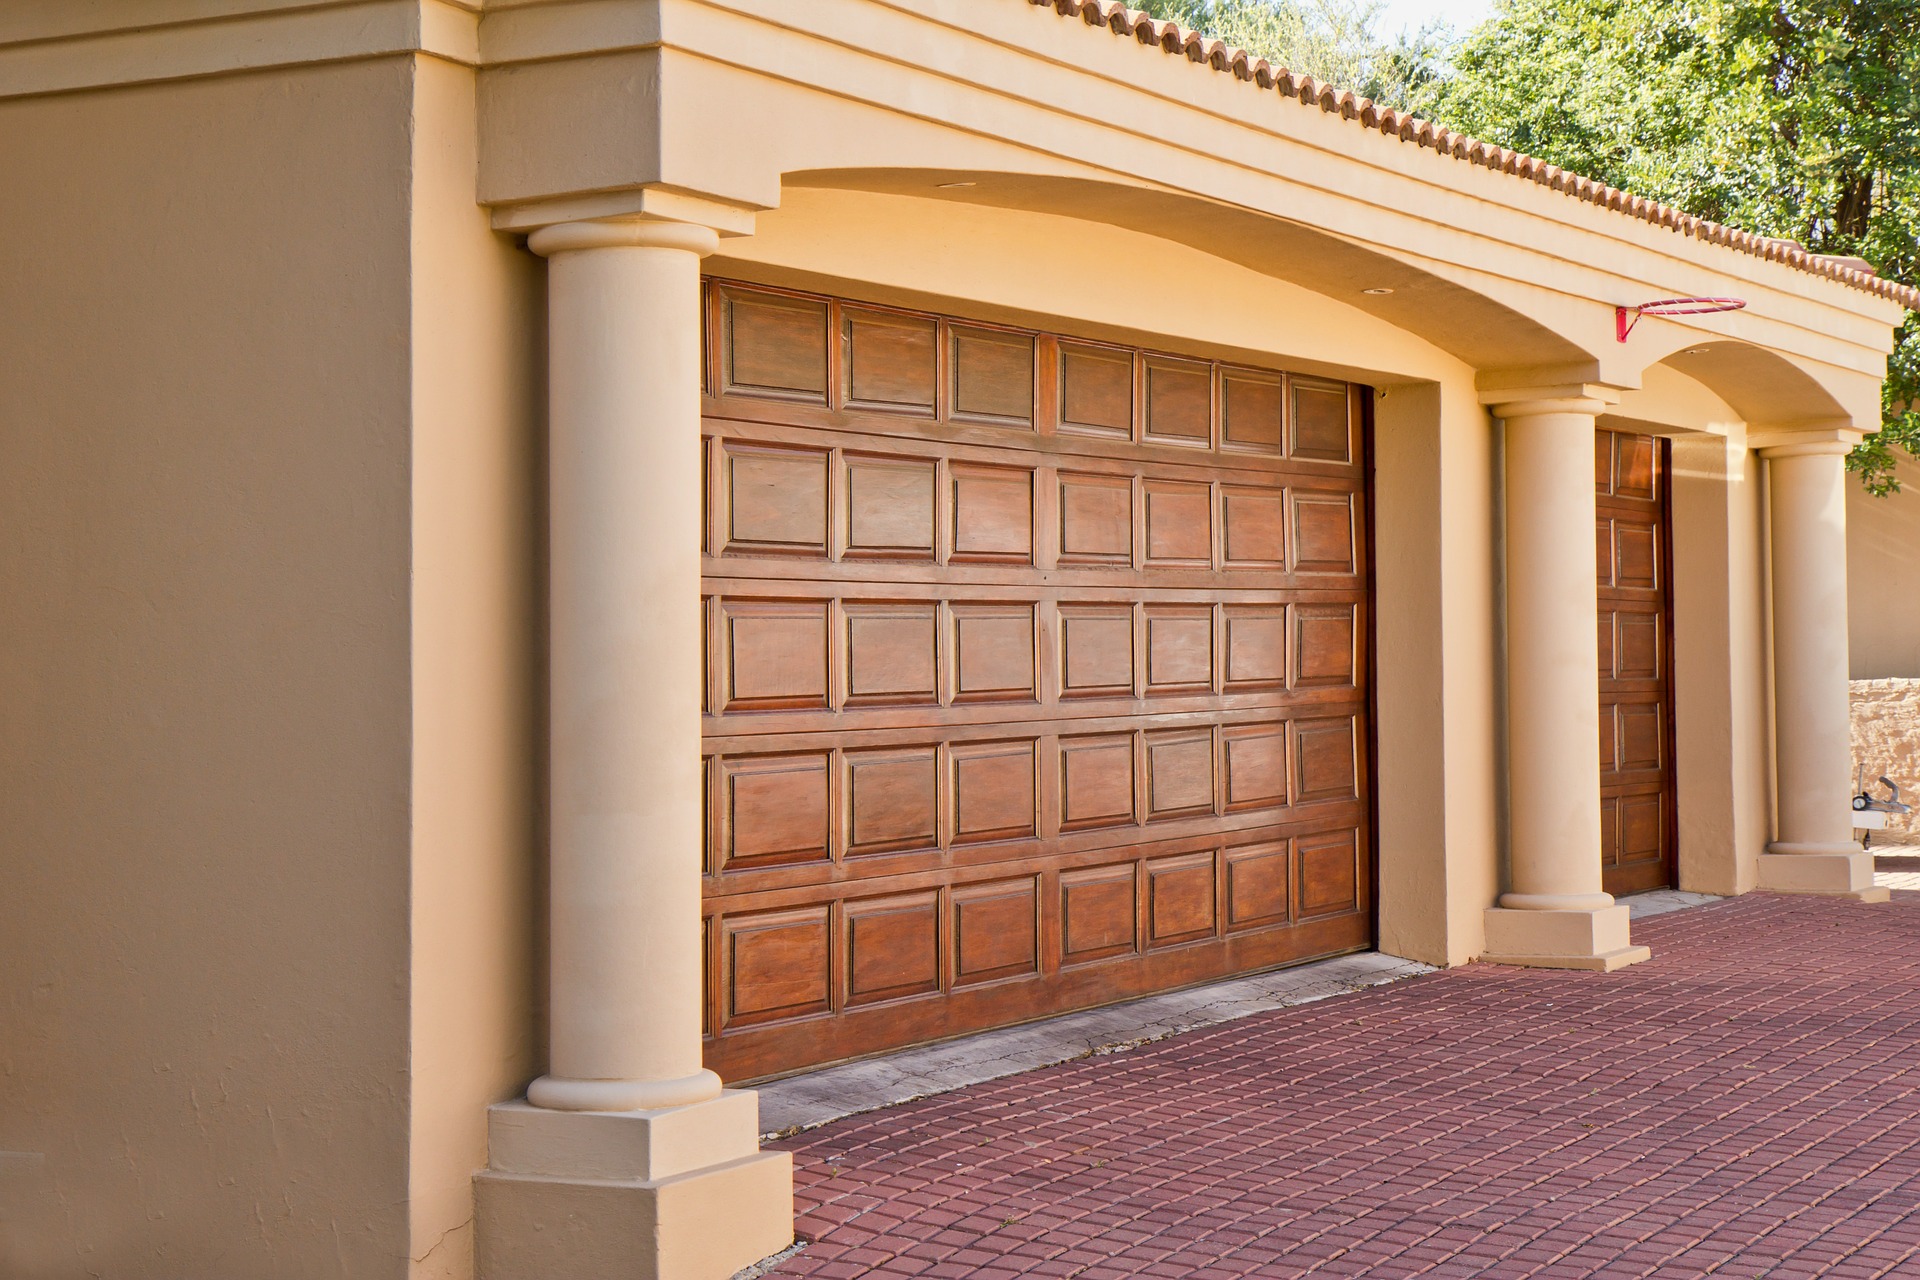 You are currently viewing Trouble Finding What You Need? Have Zones Planned for Your Garage!